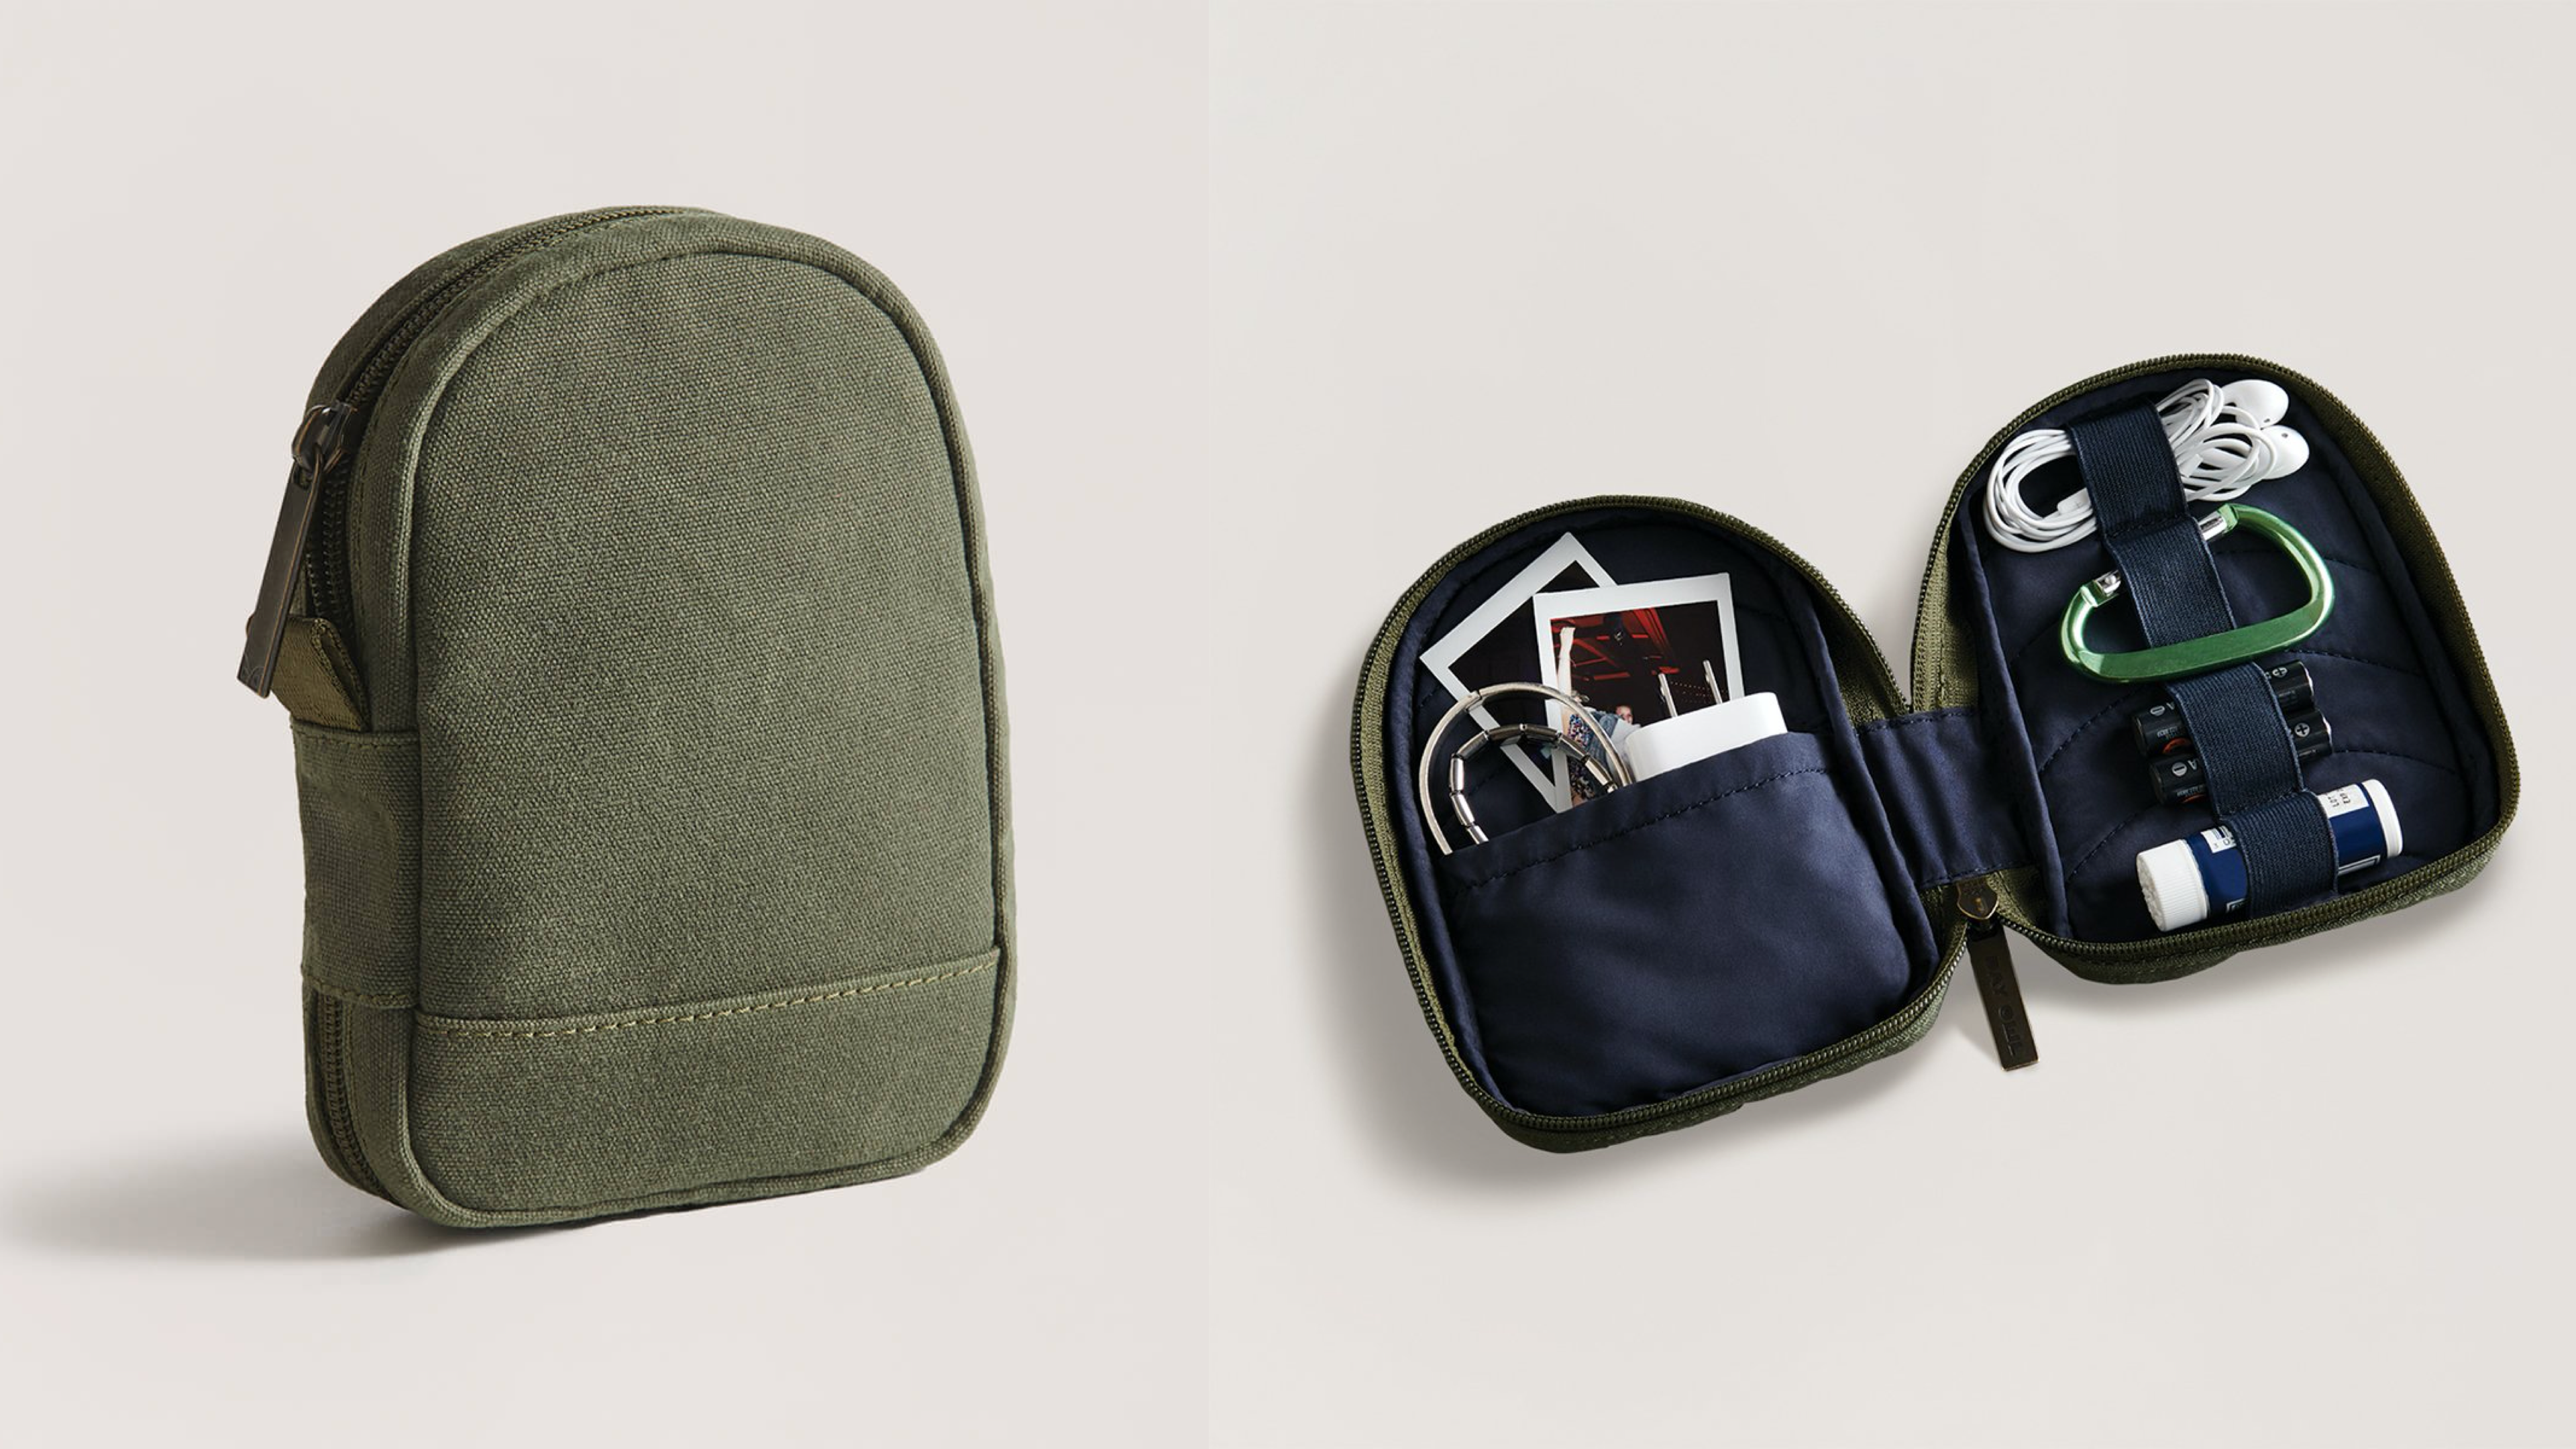 tech pouch that can hold charing cables and much more